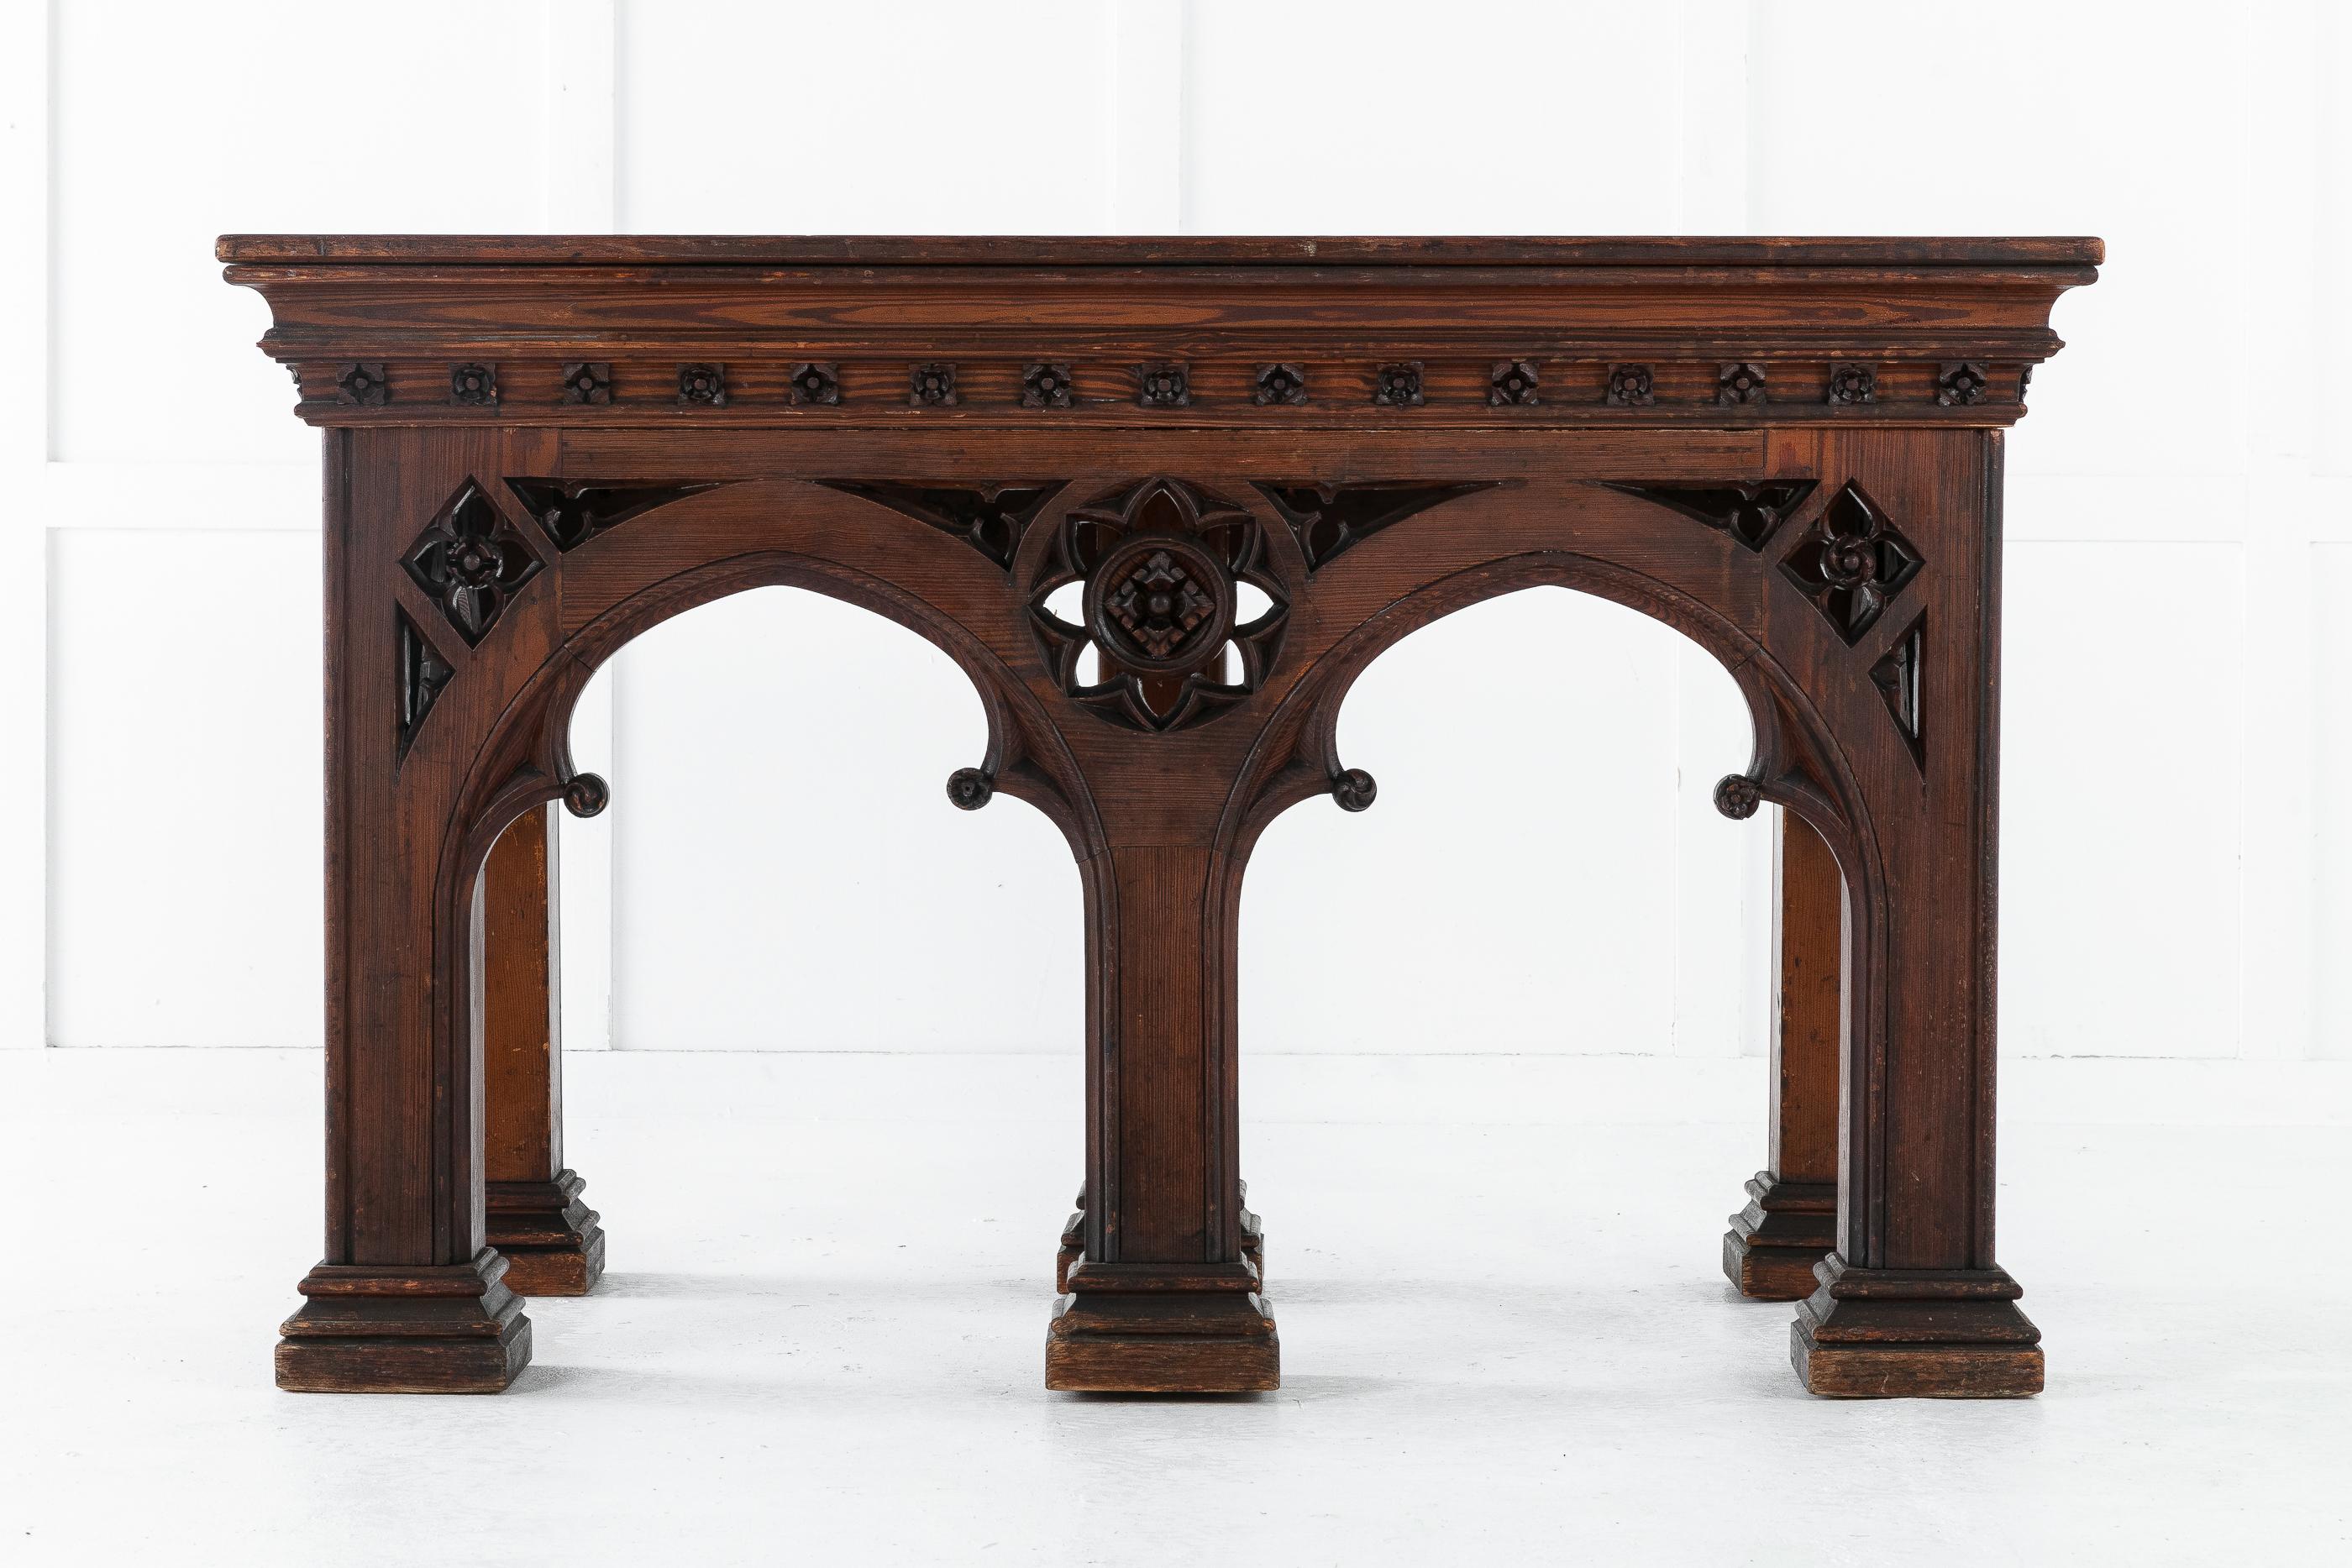 A large and very impressive 19th century Victorian Gothic console table. Having Gothic lancet arcade arches, supported by large square feet, with a central carved florette to the front.